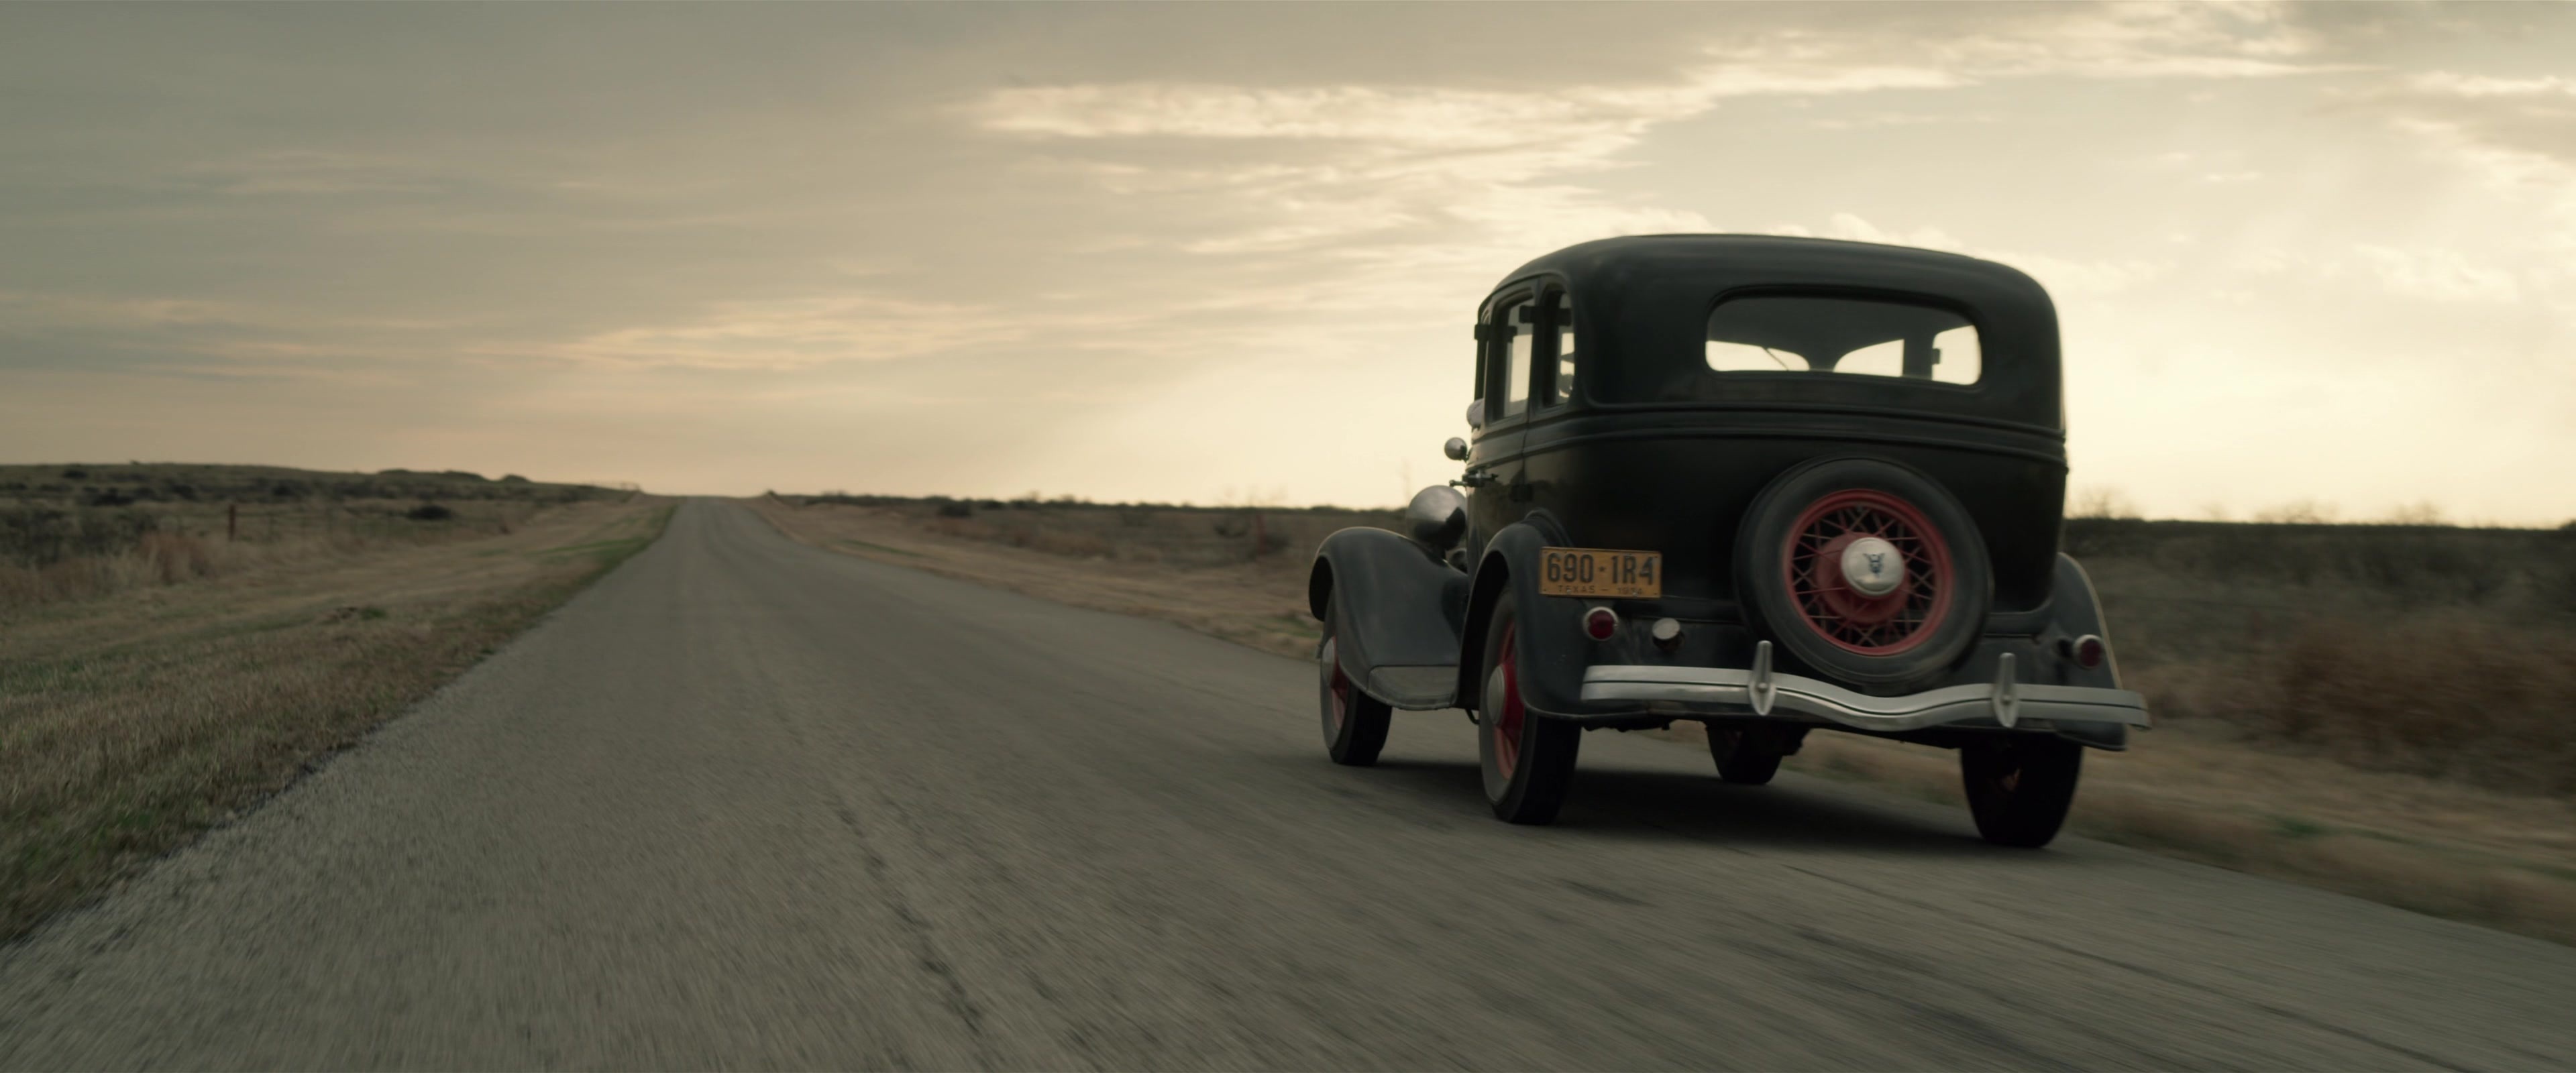 The Highwaymen 2019 movie, Iconic Ford V8, 3840x1600 Dual Screen Desktop